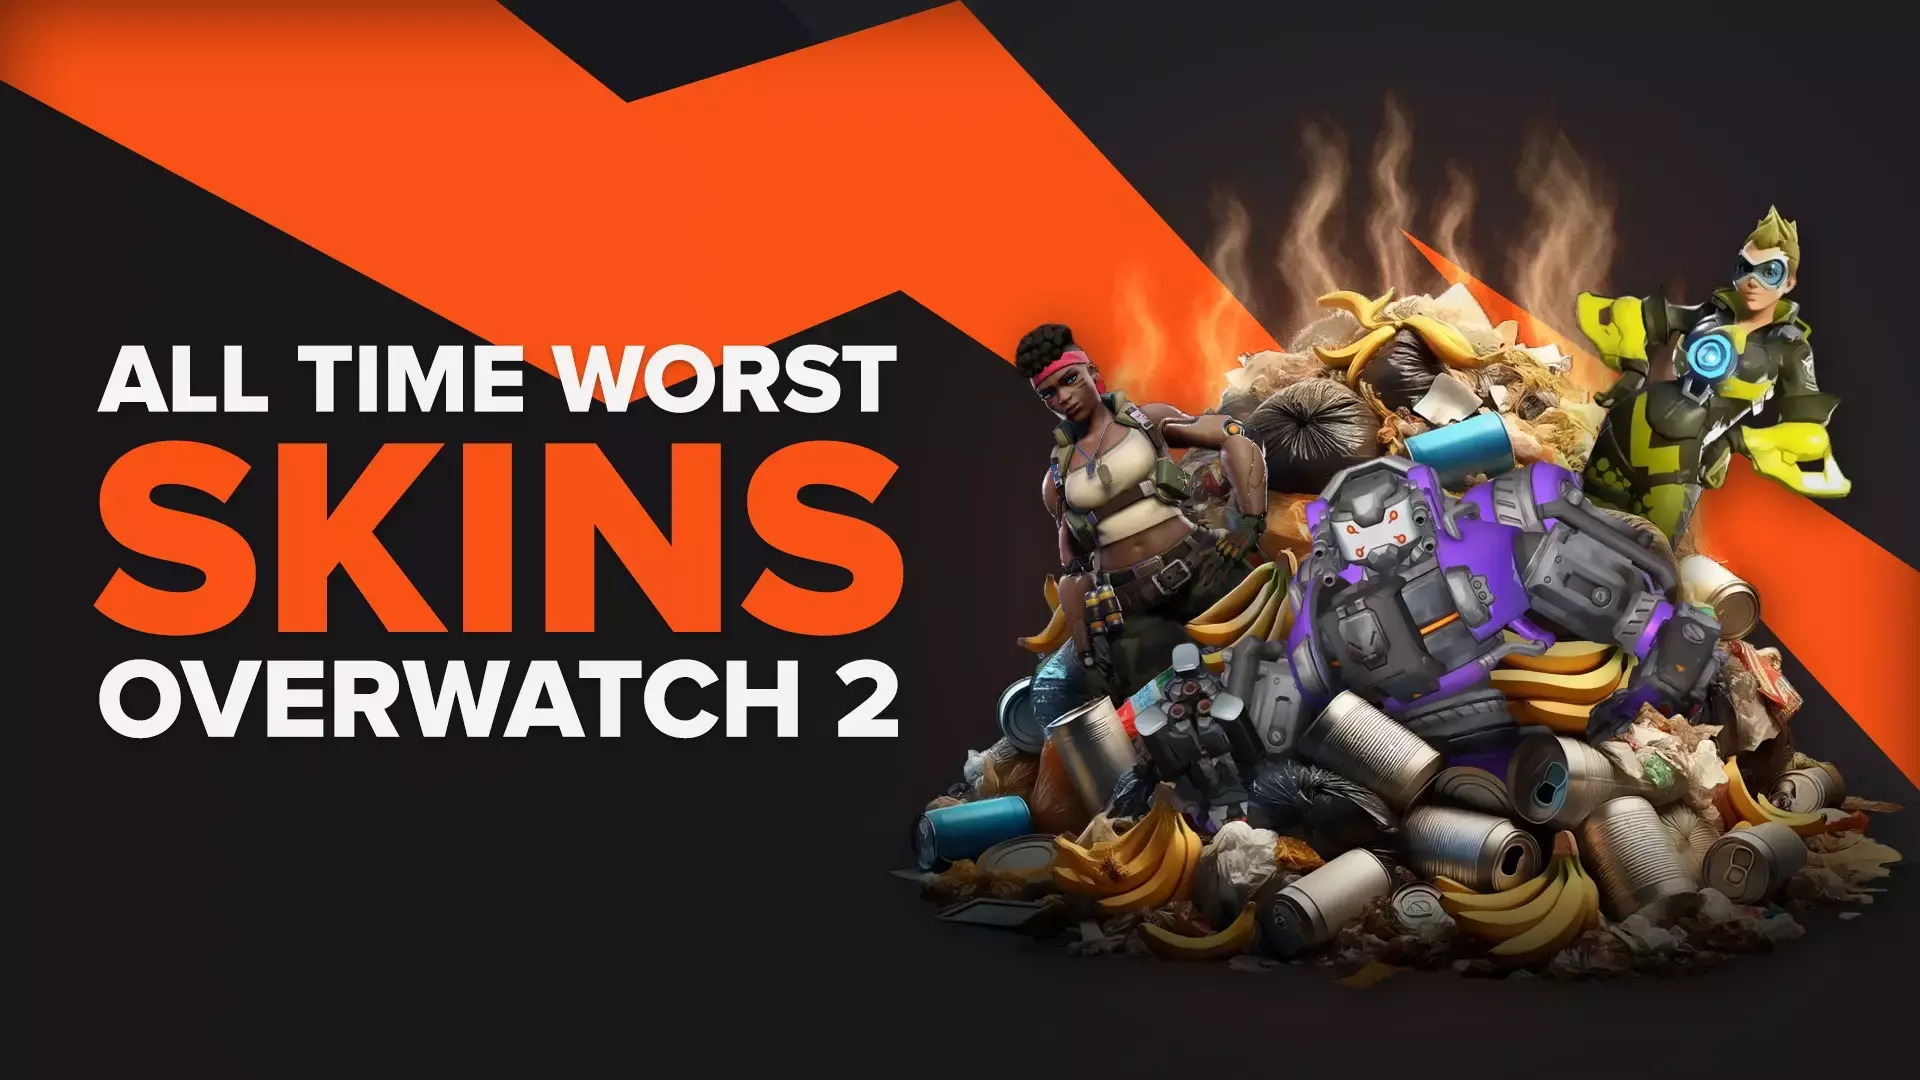 10 Worst Skins of All Time in Overwatch 2